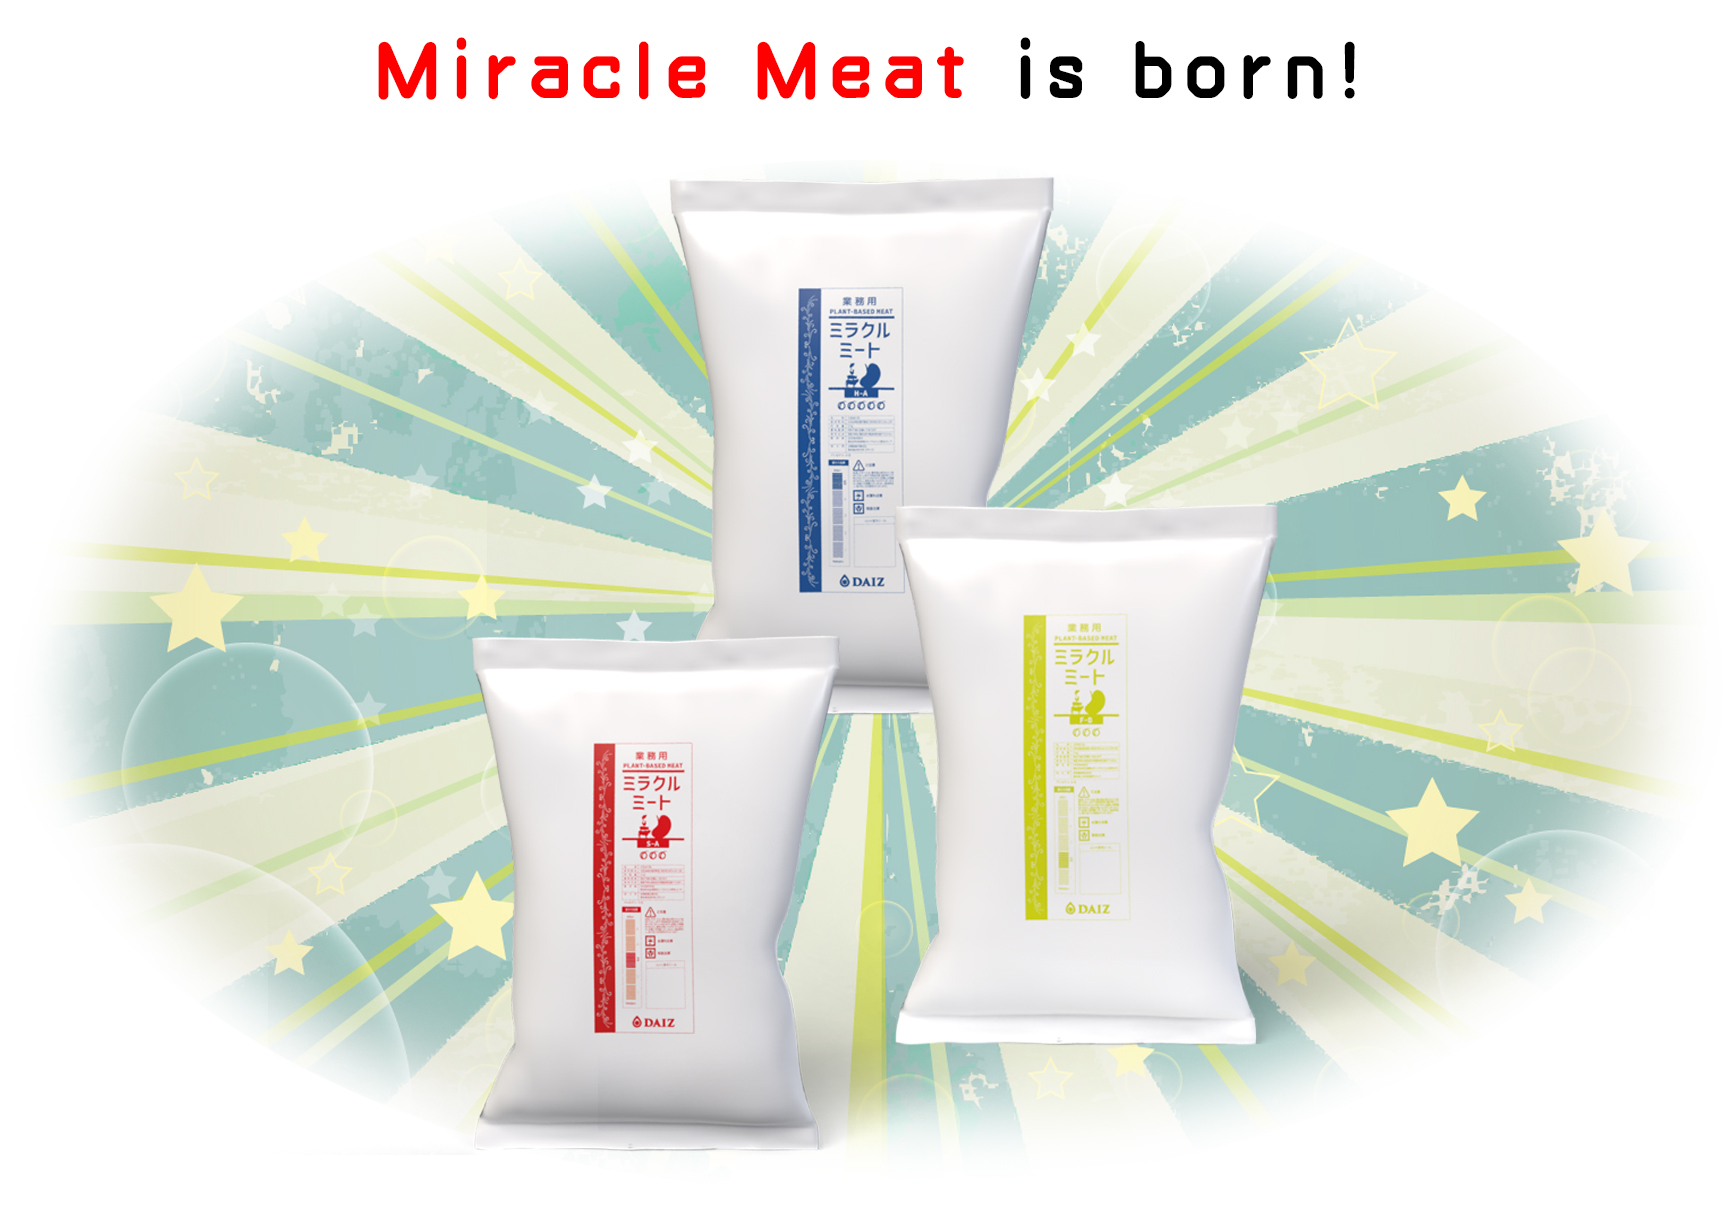 Miracle Meat is born!